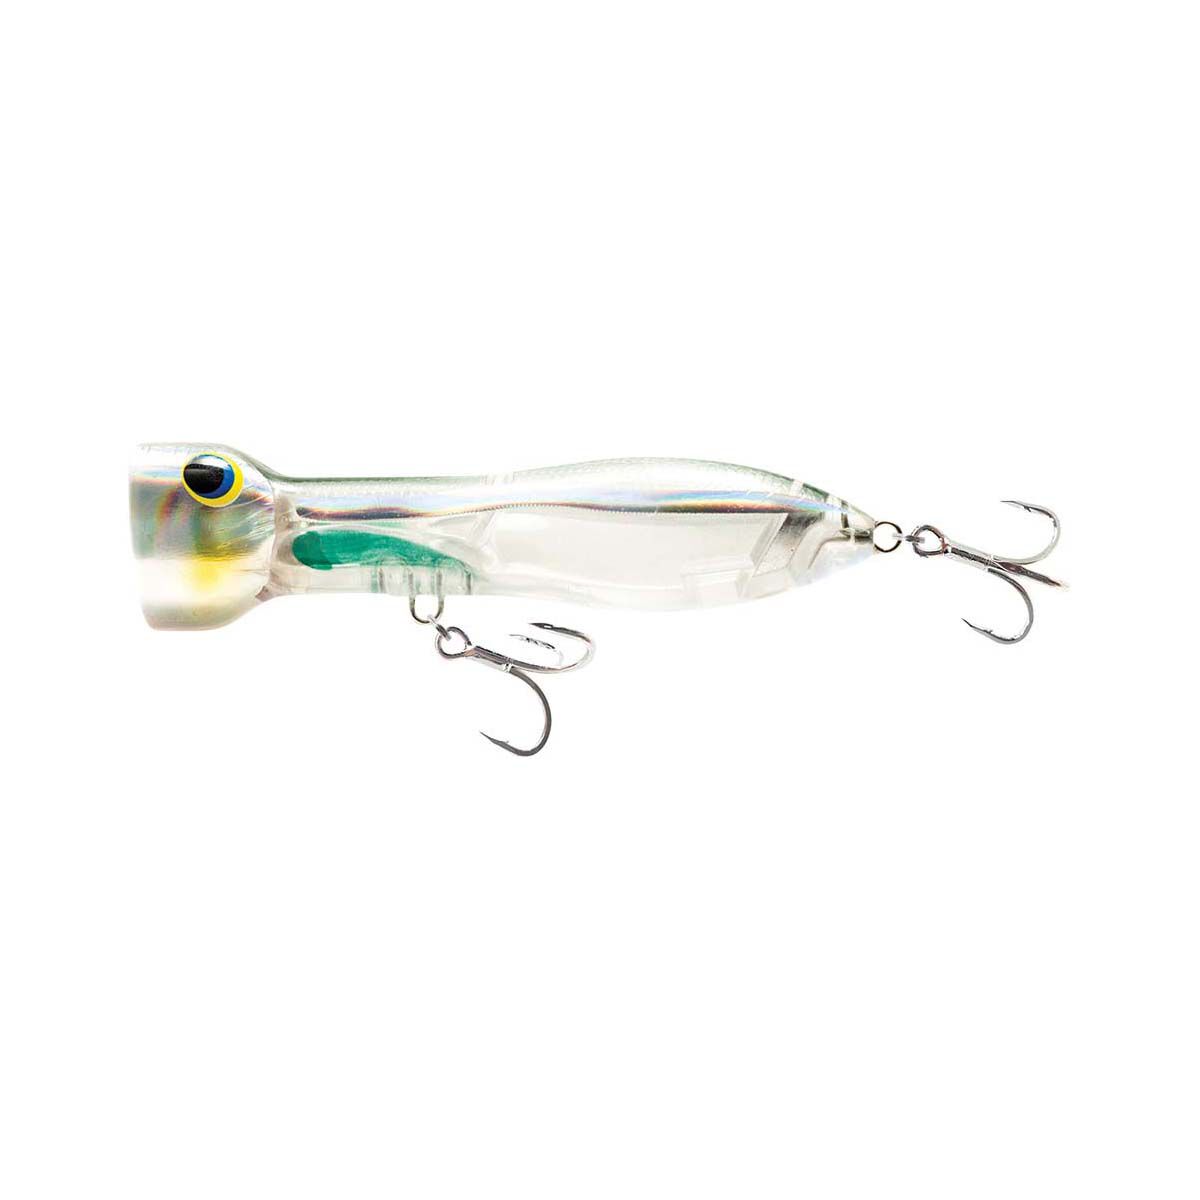 Nomad Chug Norris Surface Lure 50mm Holo Ghost Shad